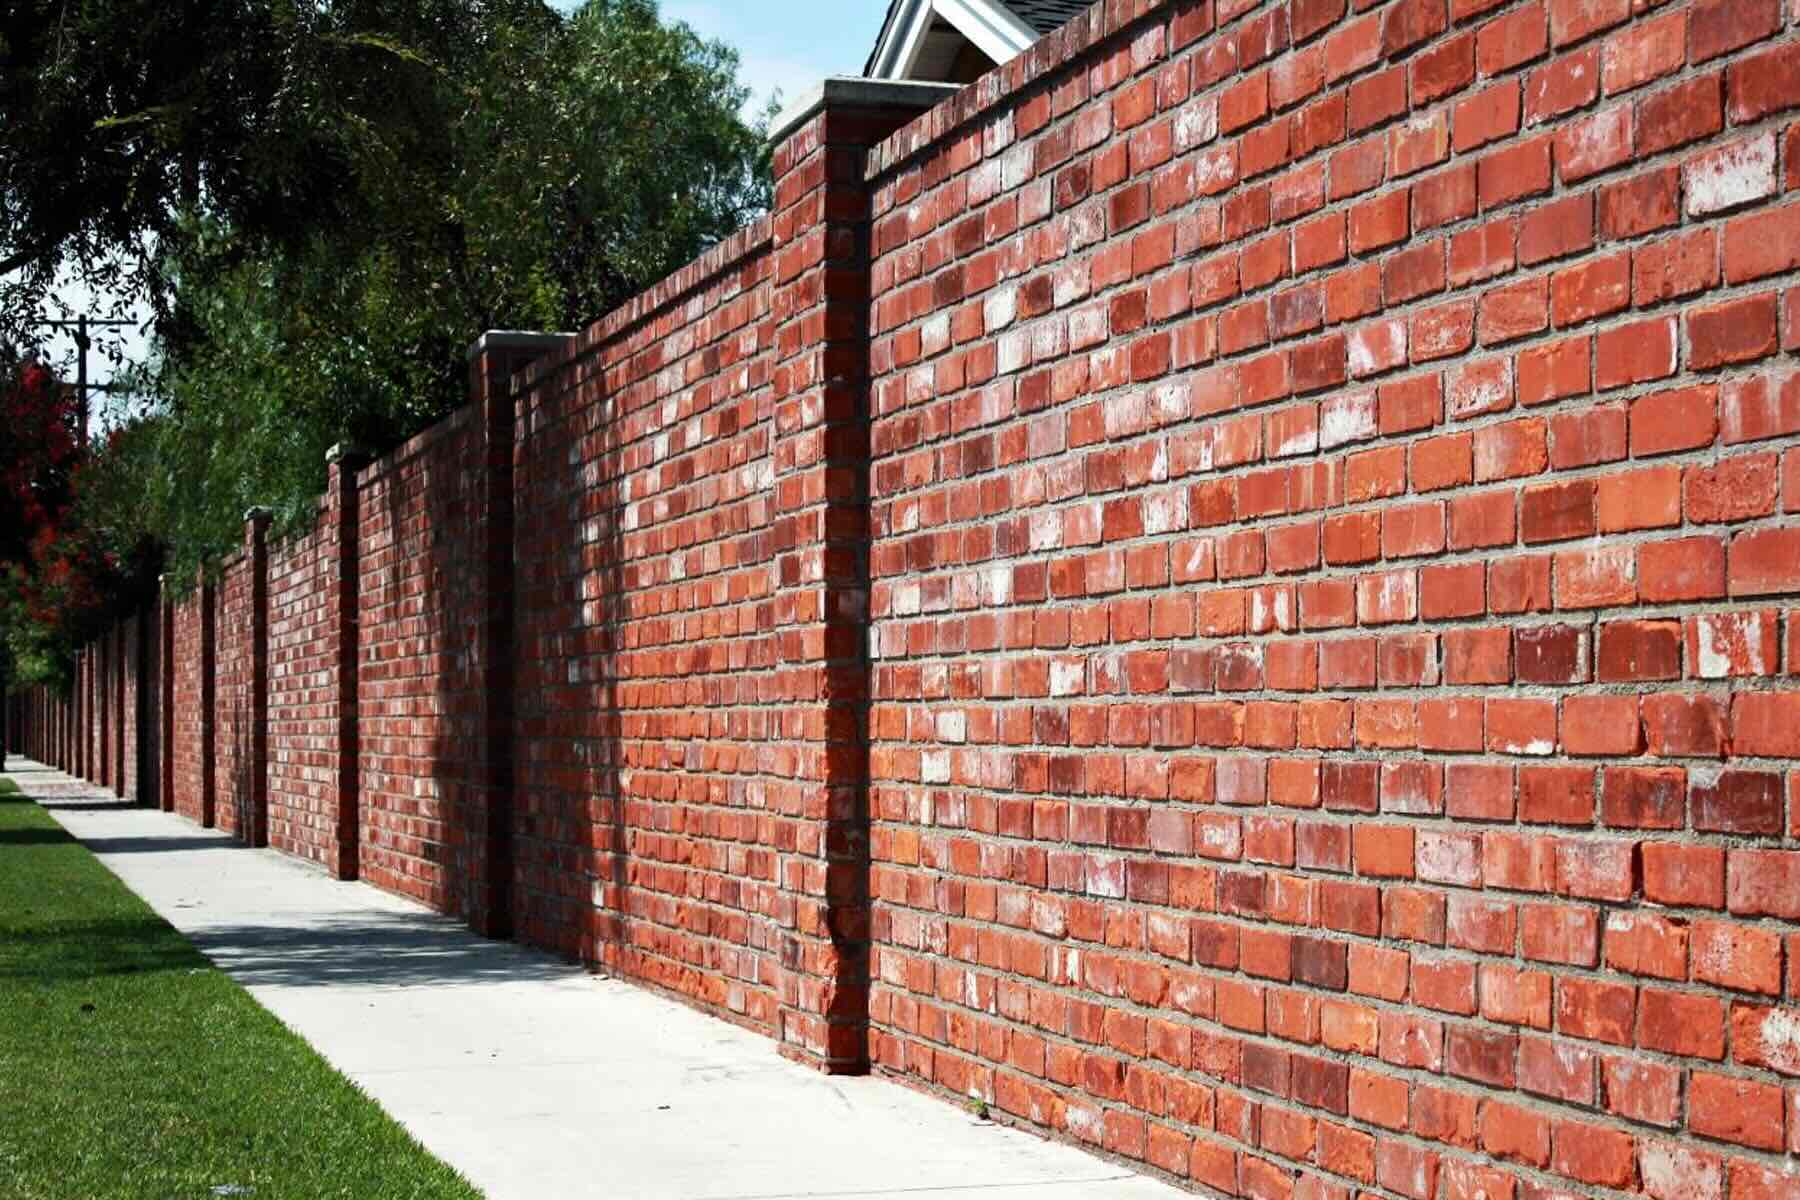 How To Cover A Brick Wall